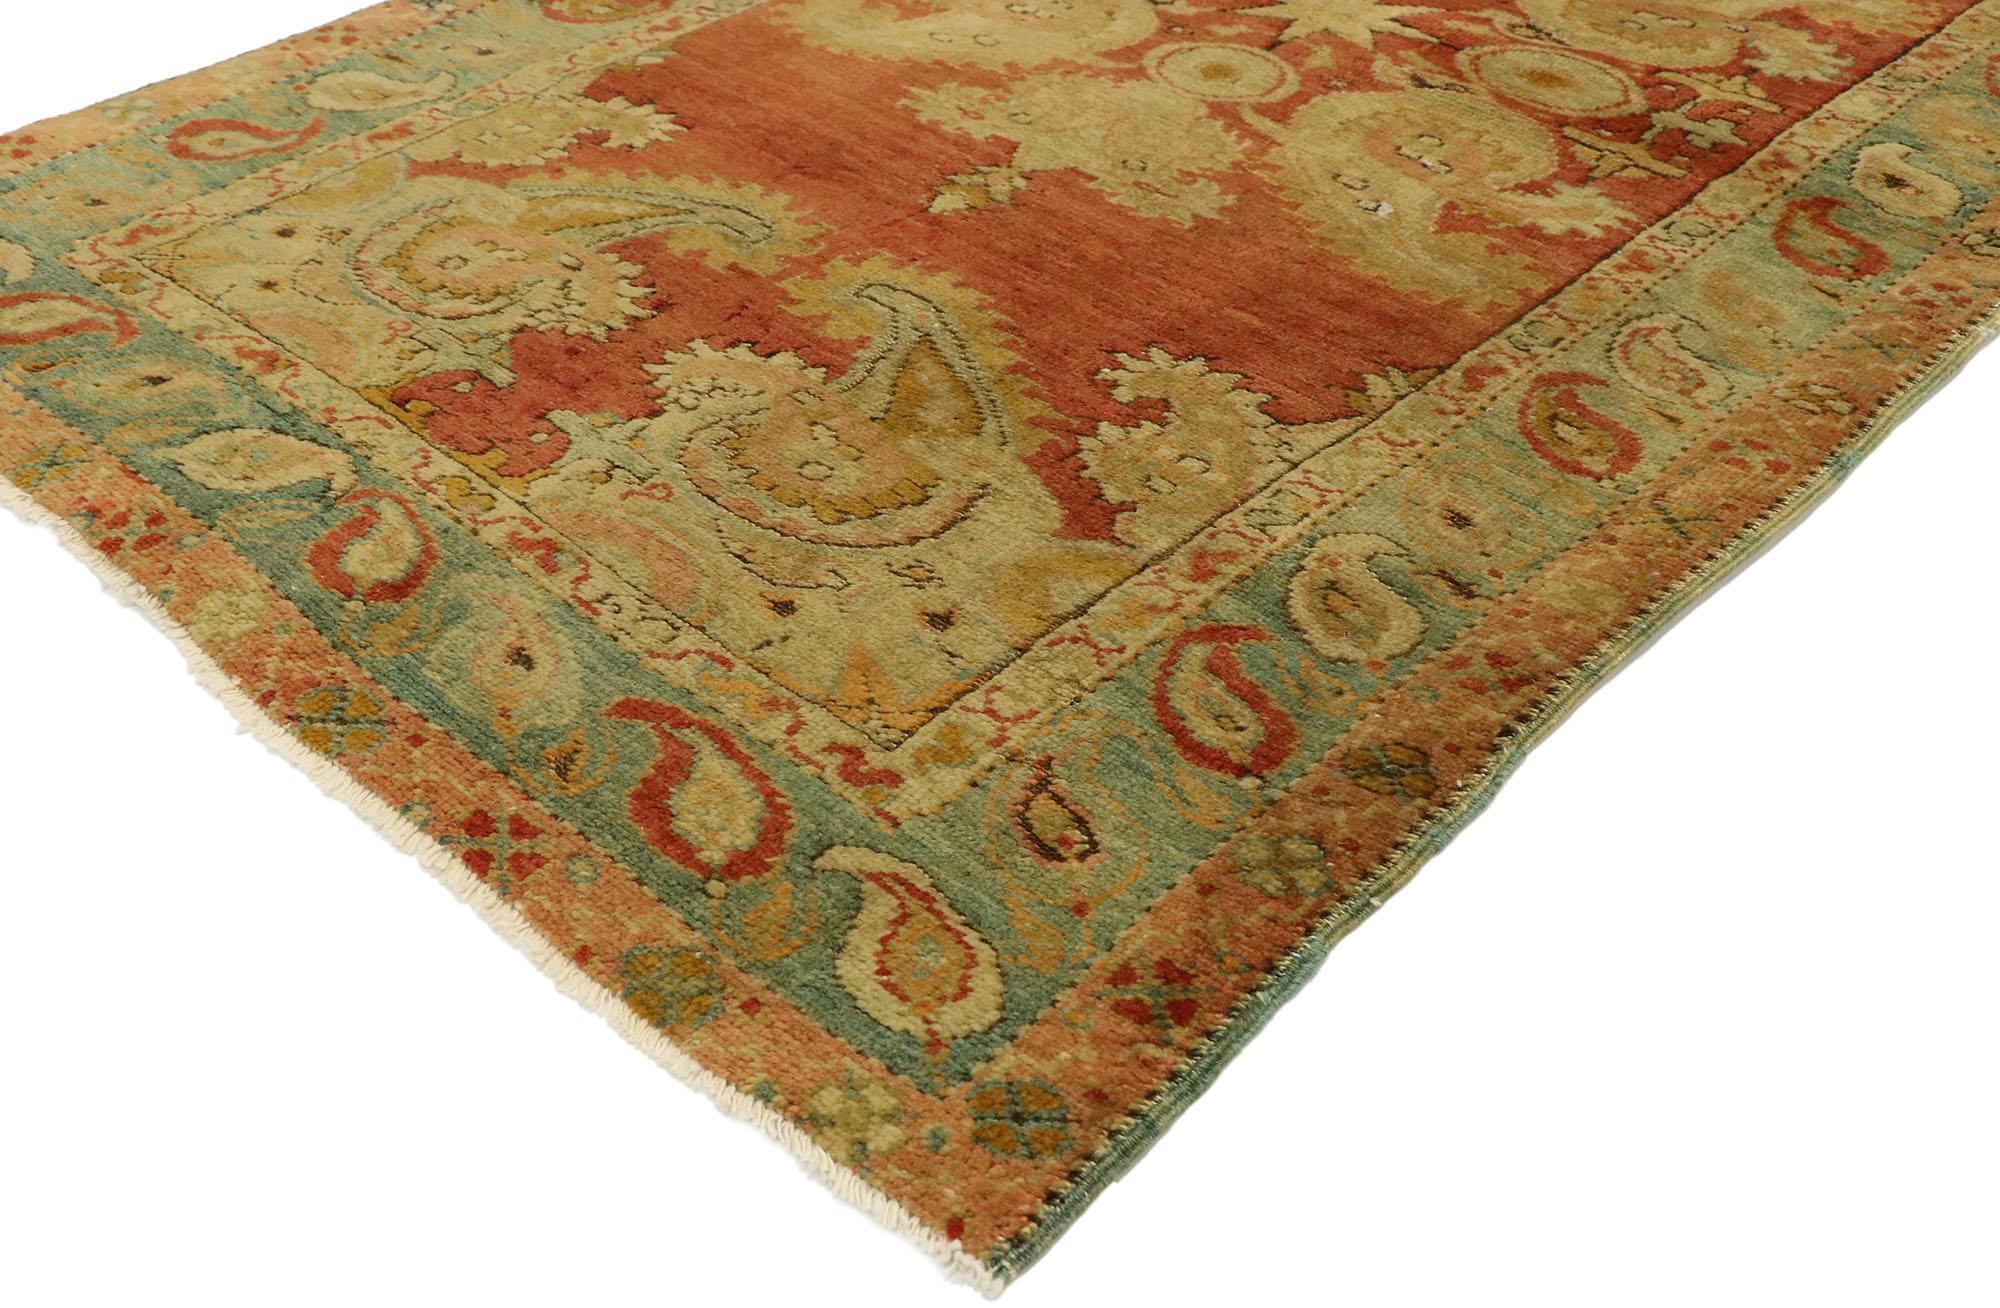 51395, vintage Turkish Oushak Accent rug with all-over Boteh Motif. This hand knotted wool Turkish Oushak rug features a field of red and orange hues covered with dancing botehs, stars and palmettes in shades of cerulean, pistachio, light sage,